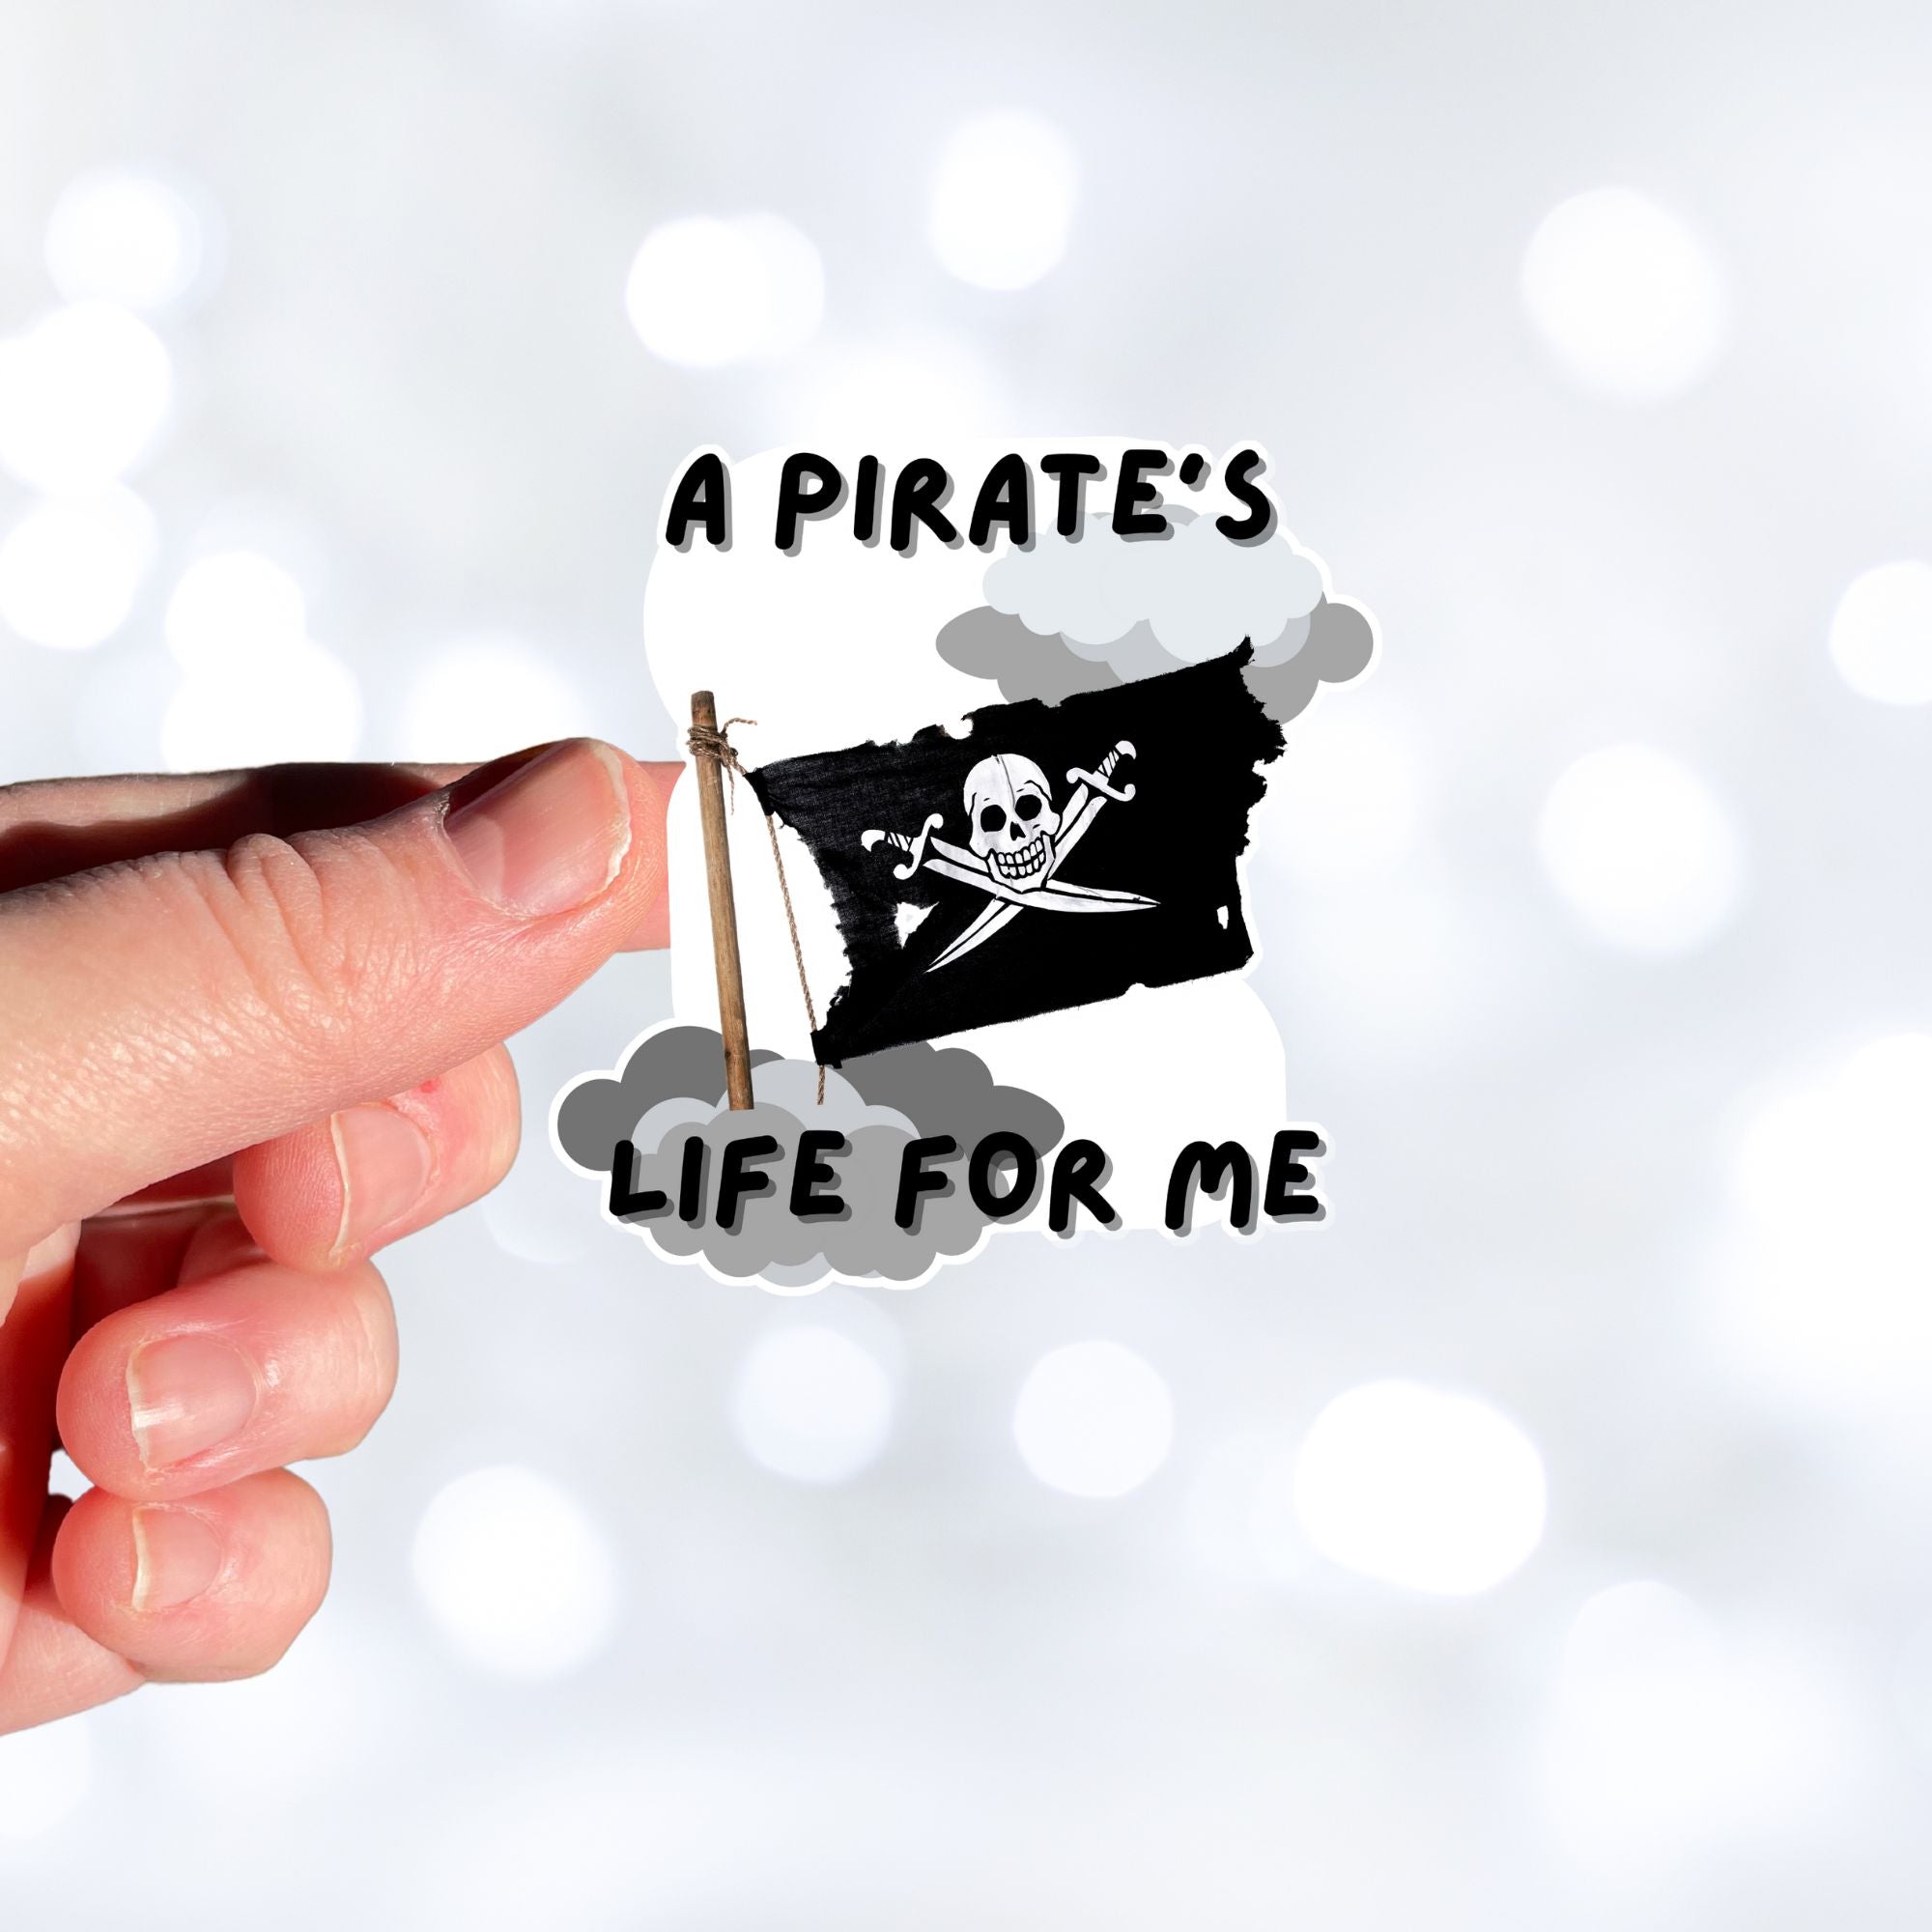 If you think a pirate's life is for you, then this individual die-cut sticker is just what you need! This pirate's life sticker features a jolly rodger (skull and crossed swords) flag with storm clouds and the saying "A Pirate's Life For Me". This image shows a hand holding the pirate's life sticker.